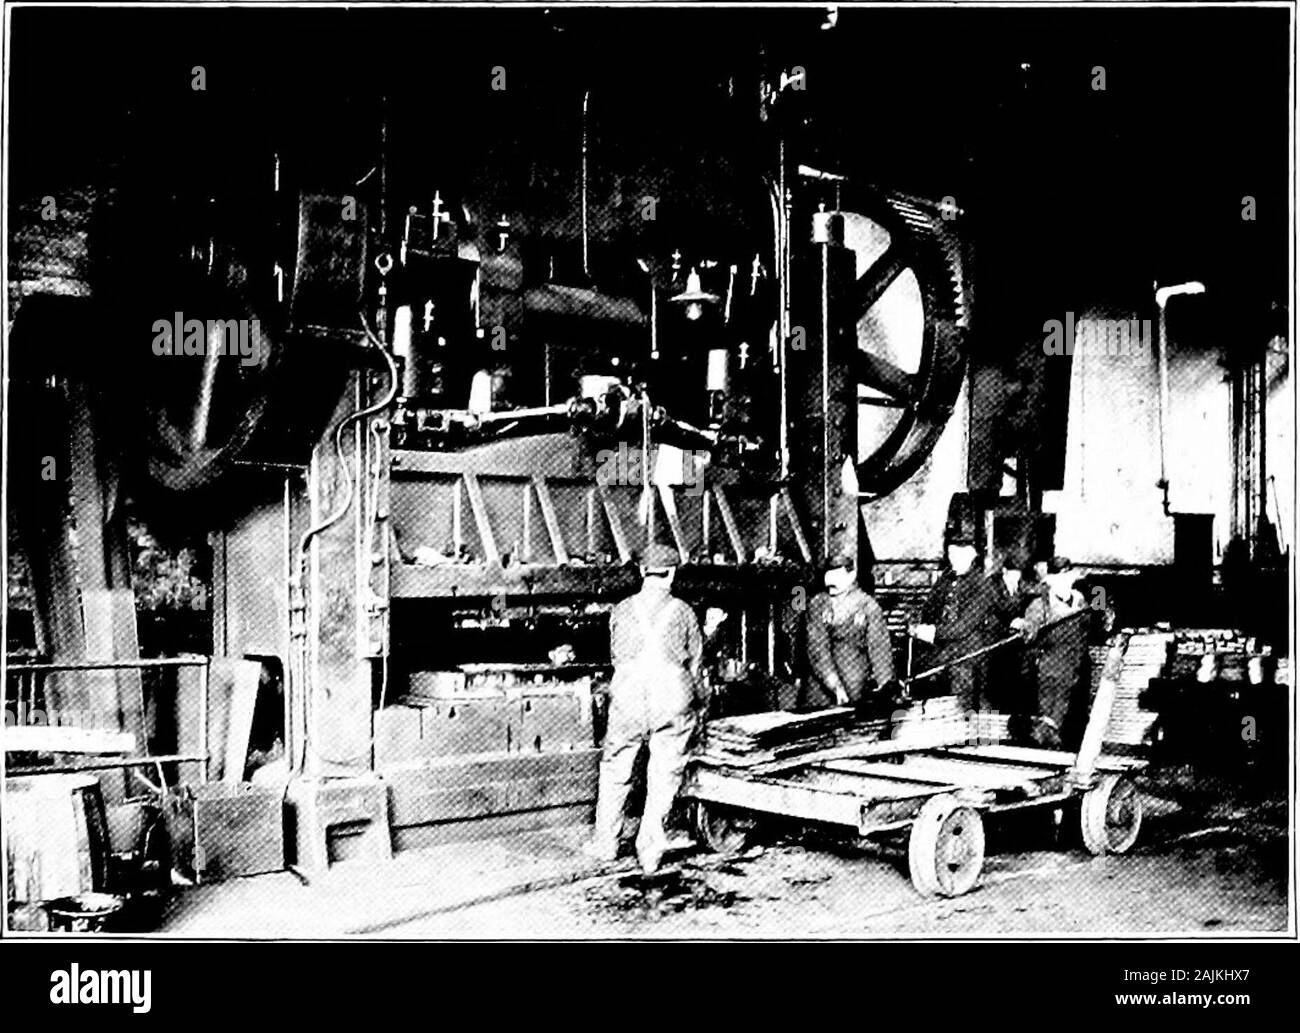 The story of the Pullman car . The steel parts used for interior car finish are all standardized,and are formed by powerful presses. Another large press at work on the forming of steel shapes forthe interior framing of the cars Digitized by Microsoft® Digitized by Microsoft® INVENTIONS AND IMPROVEMENTS The present method of heating an entire train withsteam from the locomotive was satisfactorily testedout in the winter of 1887, and was generally adoptedthe following year. By this improved system theindividual heaters in each car were abolished, anda source of much discomfort and complaint wasr Stock Photo